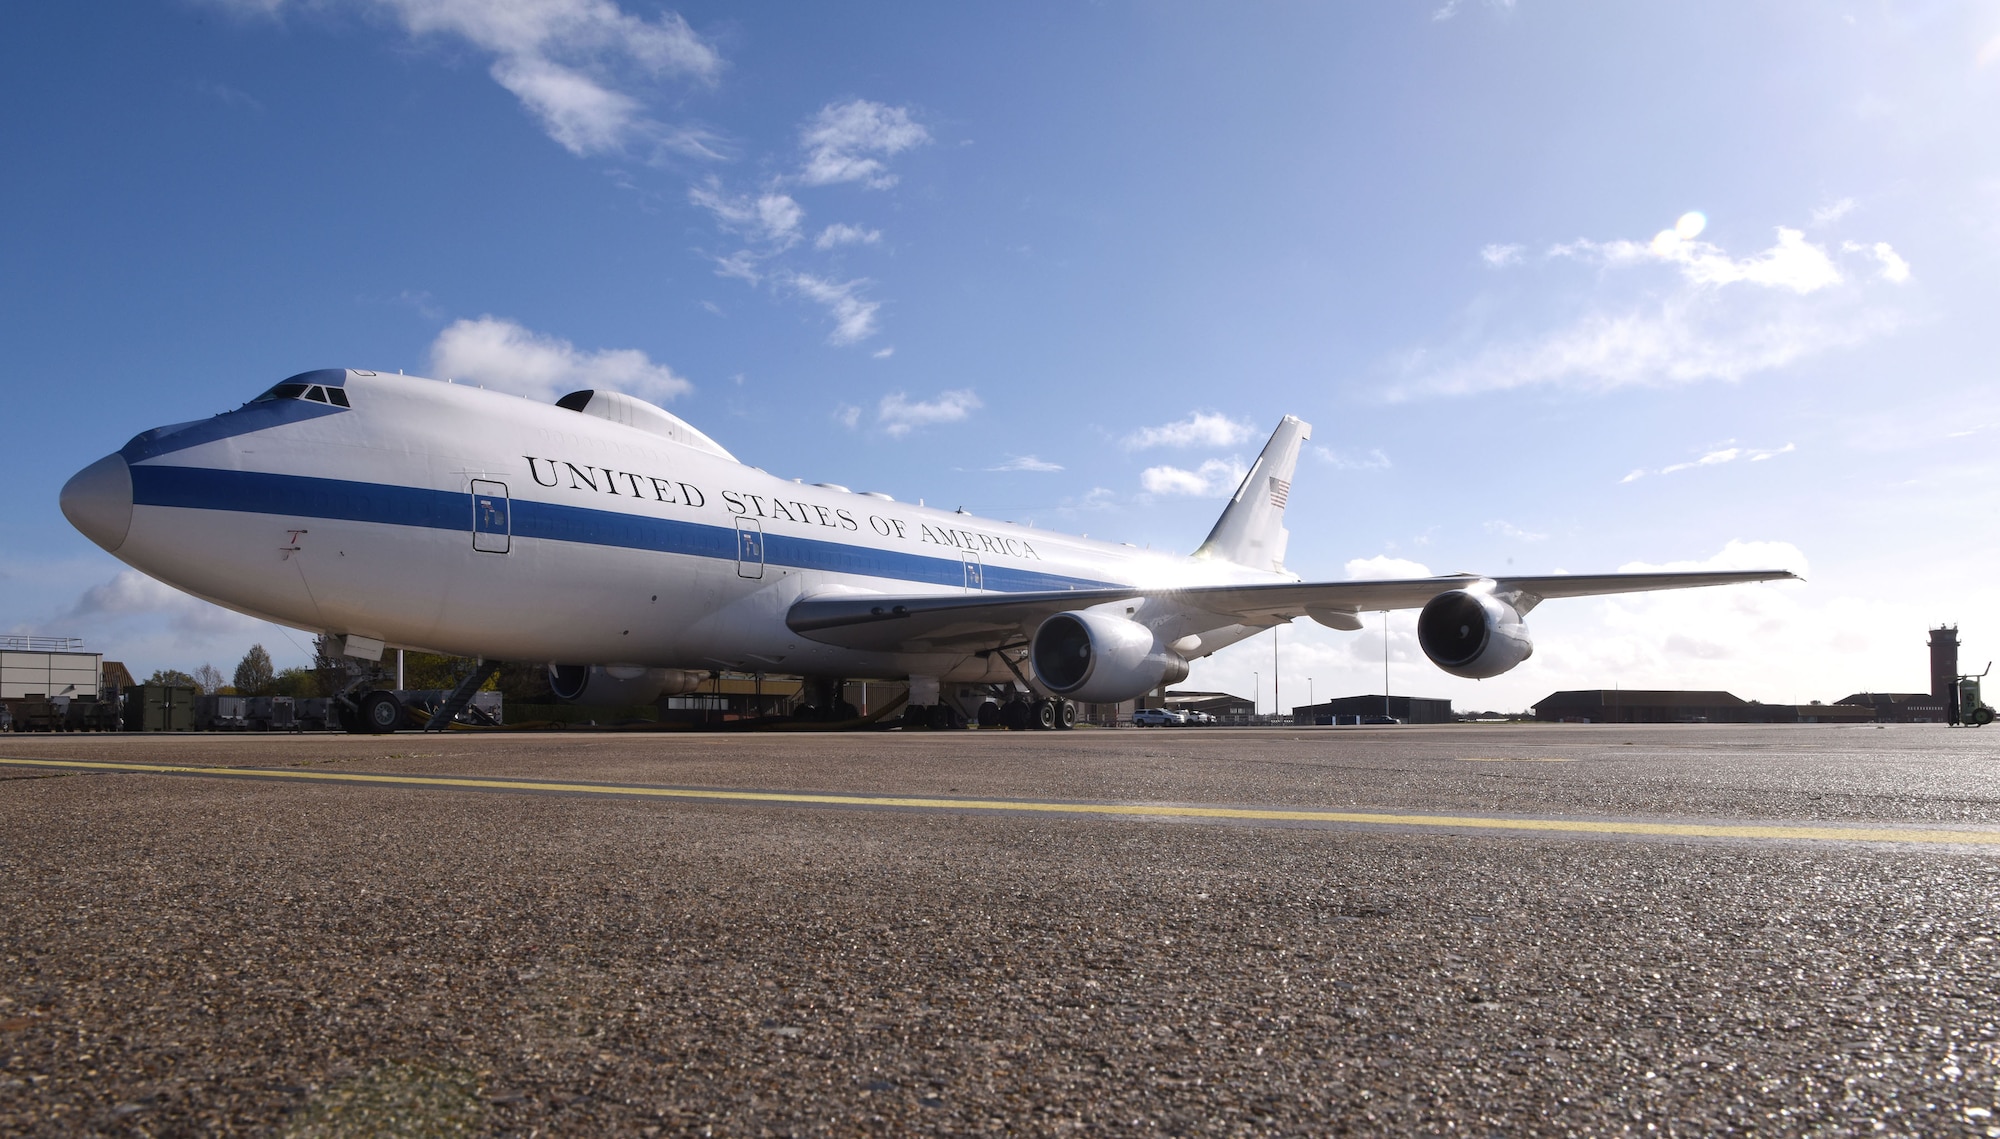 An E-4B National Airborne Operations Center stands ready at Royal Air Force Mildenhall, England, April 12, 2023. The NAOC aircraft has several missions, both operational and training, which require travel to a wide variety of locations, both within the United States and around the world. (U.S. Force photo by Karen Abeyasekere/This image has been altered for security purposes).